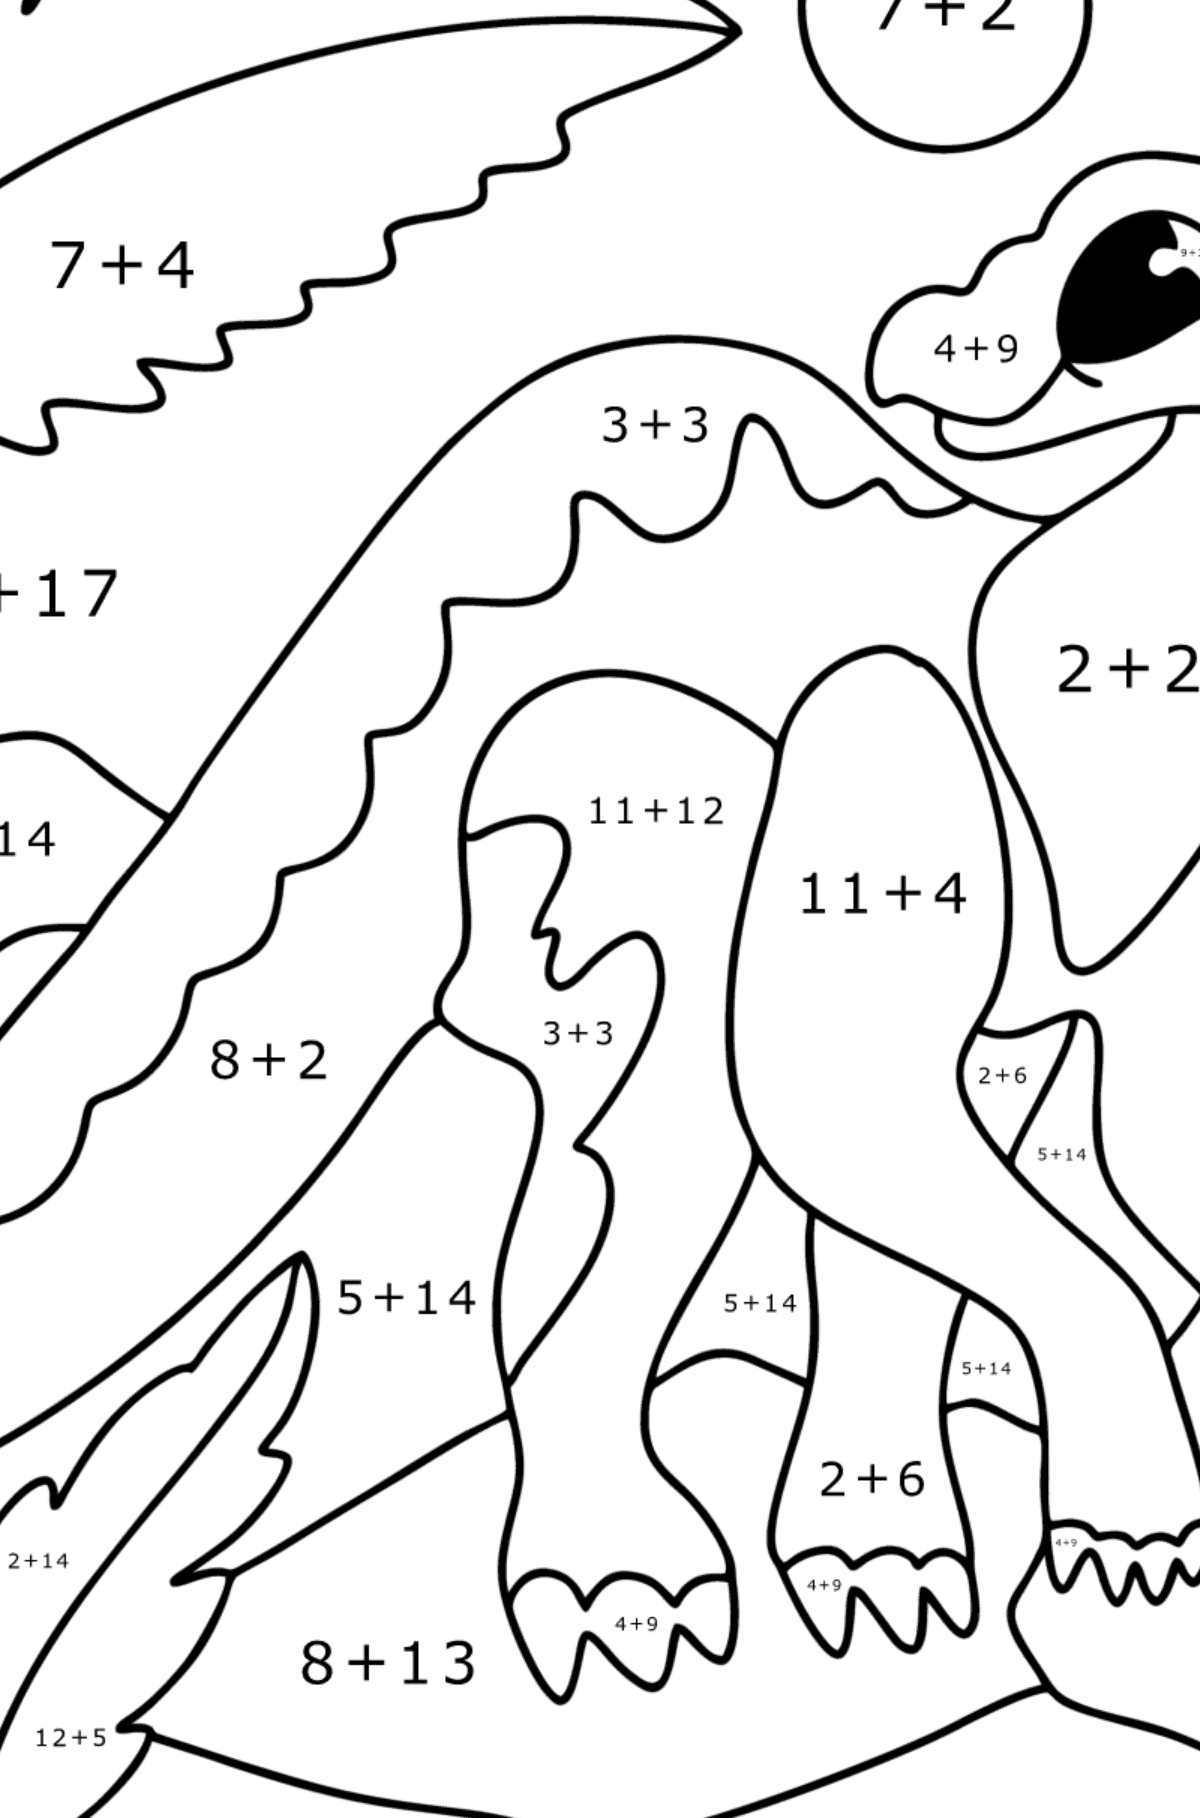 Iguanodon coloring page - Math Coloring - Addition for Kids